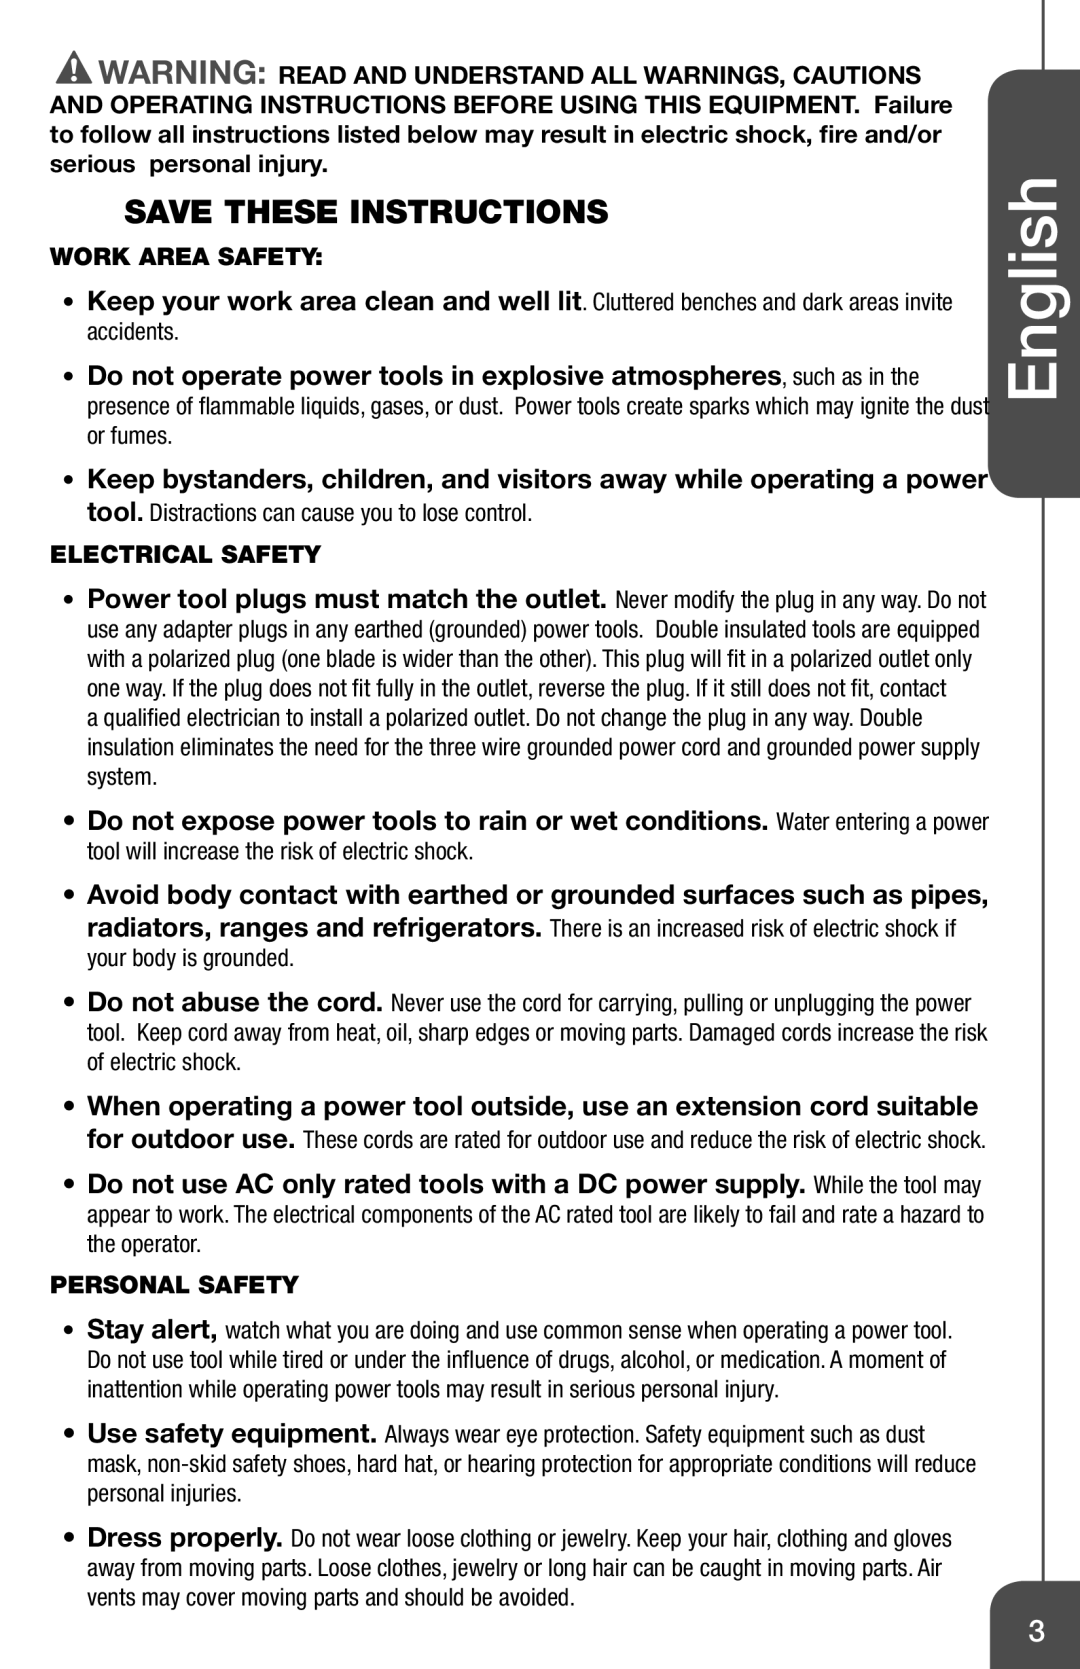 Genesis I.C.E GCD18BK Save These Instructions, English, Work Area Safety, Electrical Safety, Personal Safety 